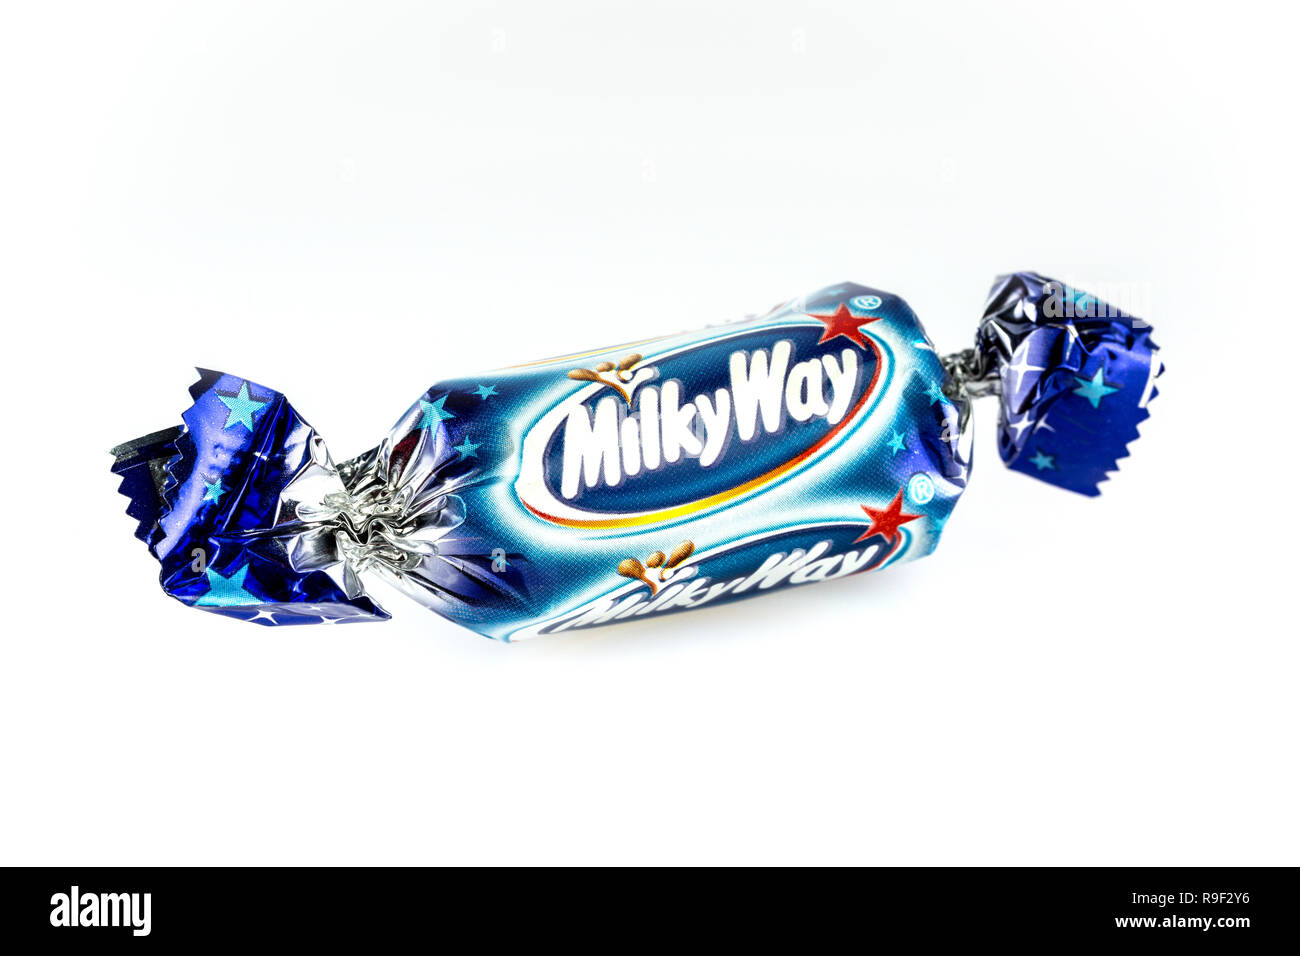 MilkyWay Celebrations Chocolate on a white background Stock Photo